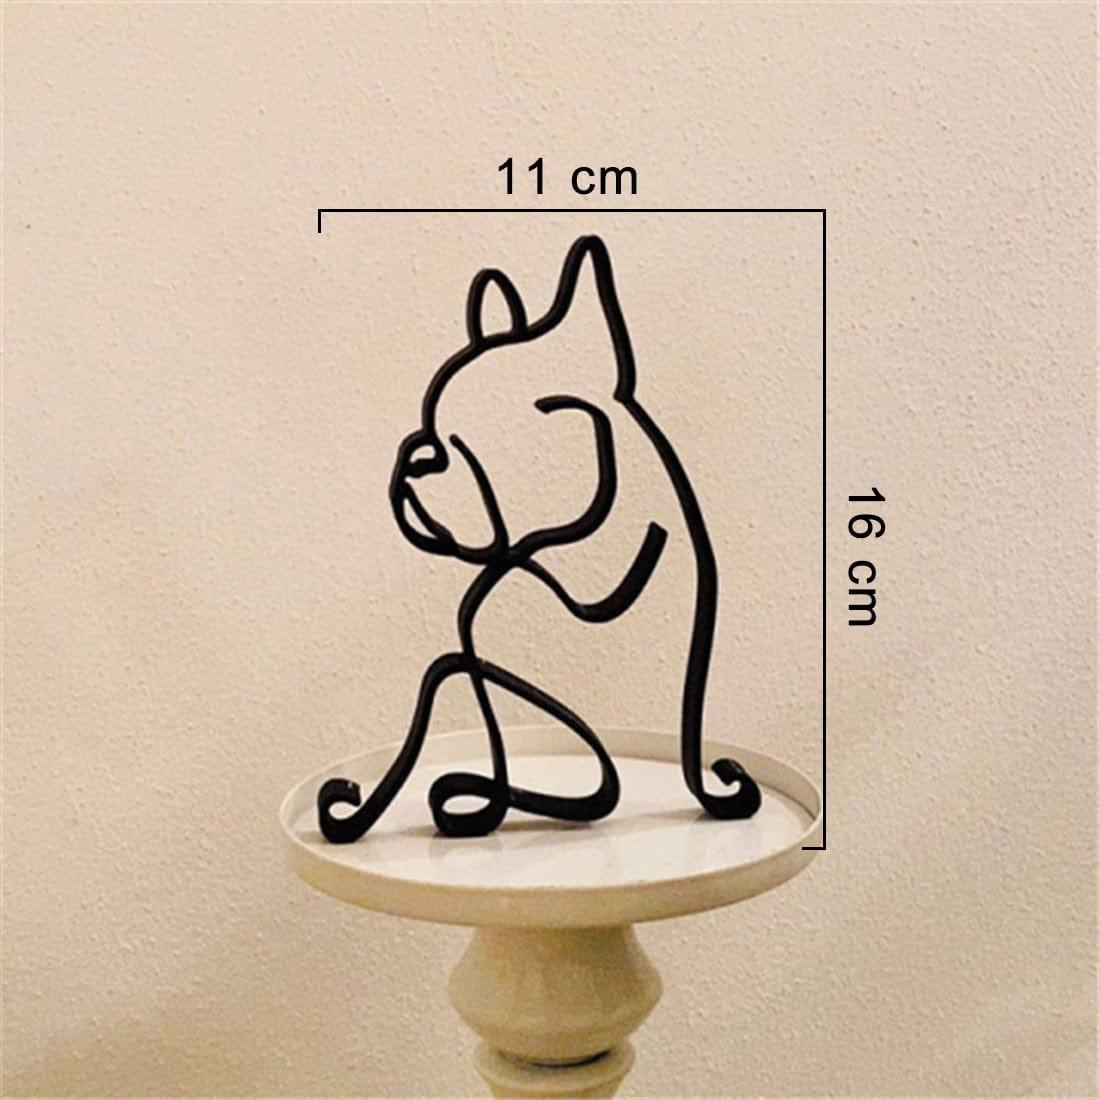 Shop 0 E Dog Art Sculpture Simple Metal Dog Abstract Art Sculpture for Home Party Office Desktop Decoration Cute Pet Dog Cats Gifts Mademoiselle Home Decor